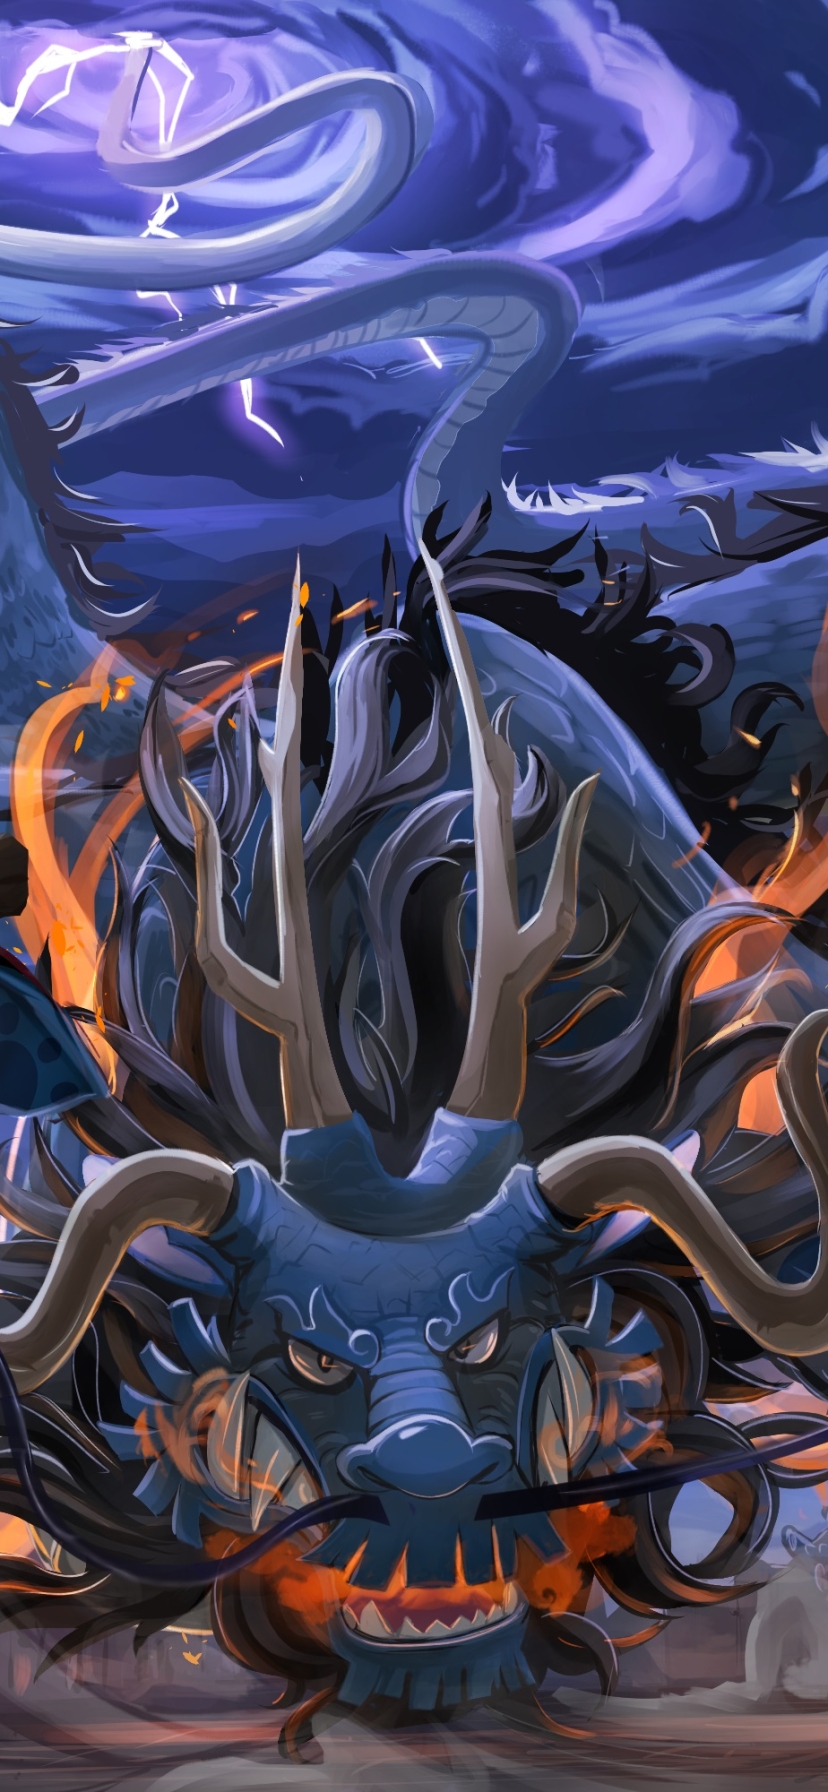 Kaido Wallpapers  Top 25 Best Kaido Wallpapers Download